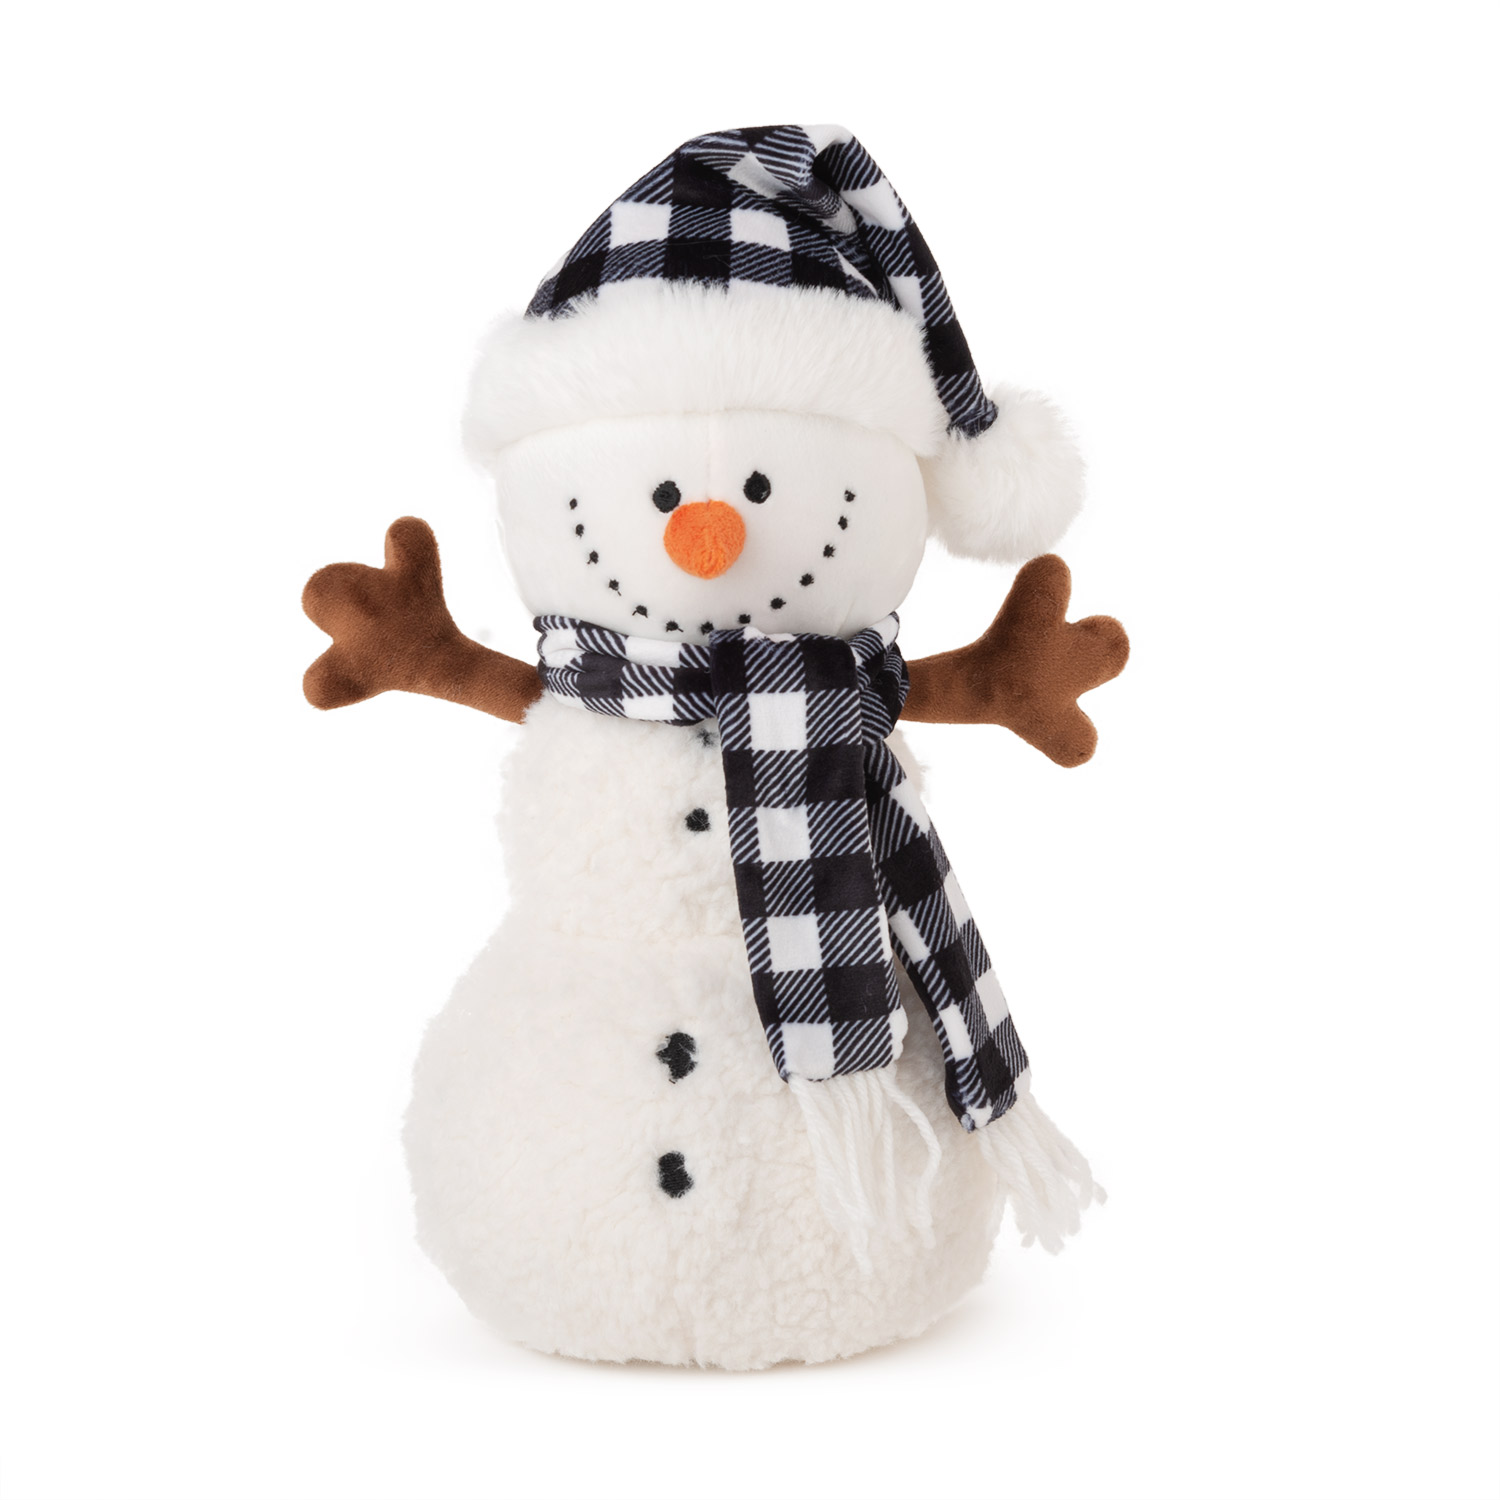 Snowman with hat and scarf - Black